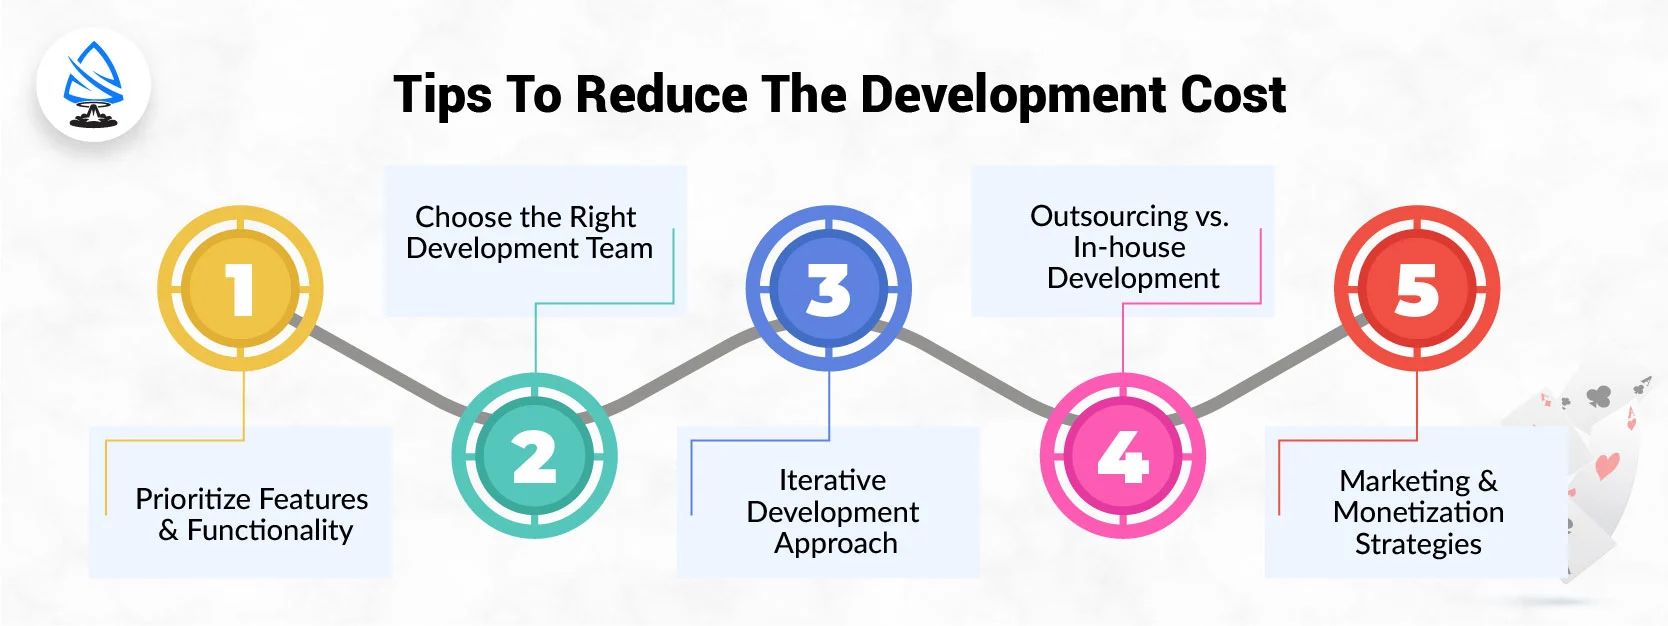 Tips To Reduce The Development Cost